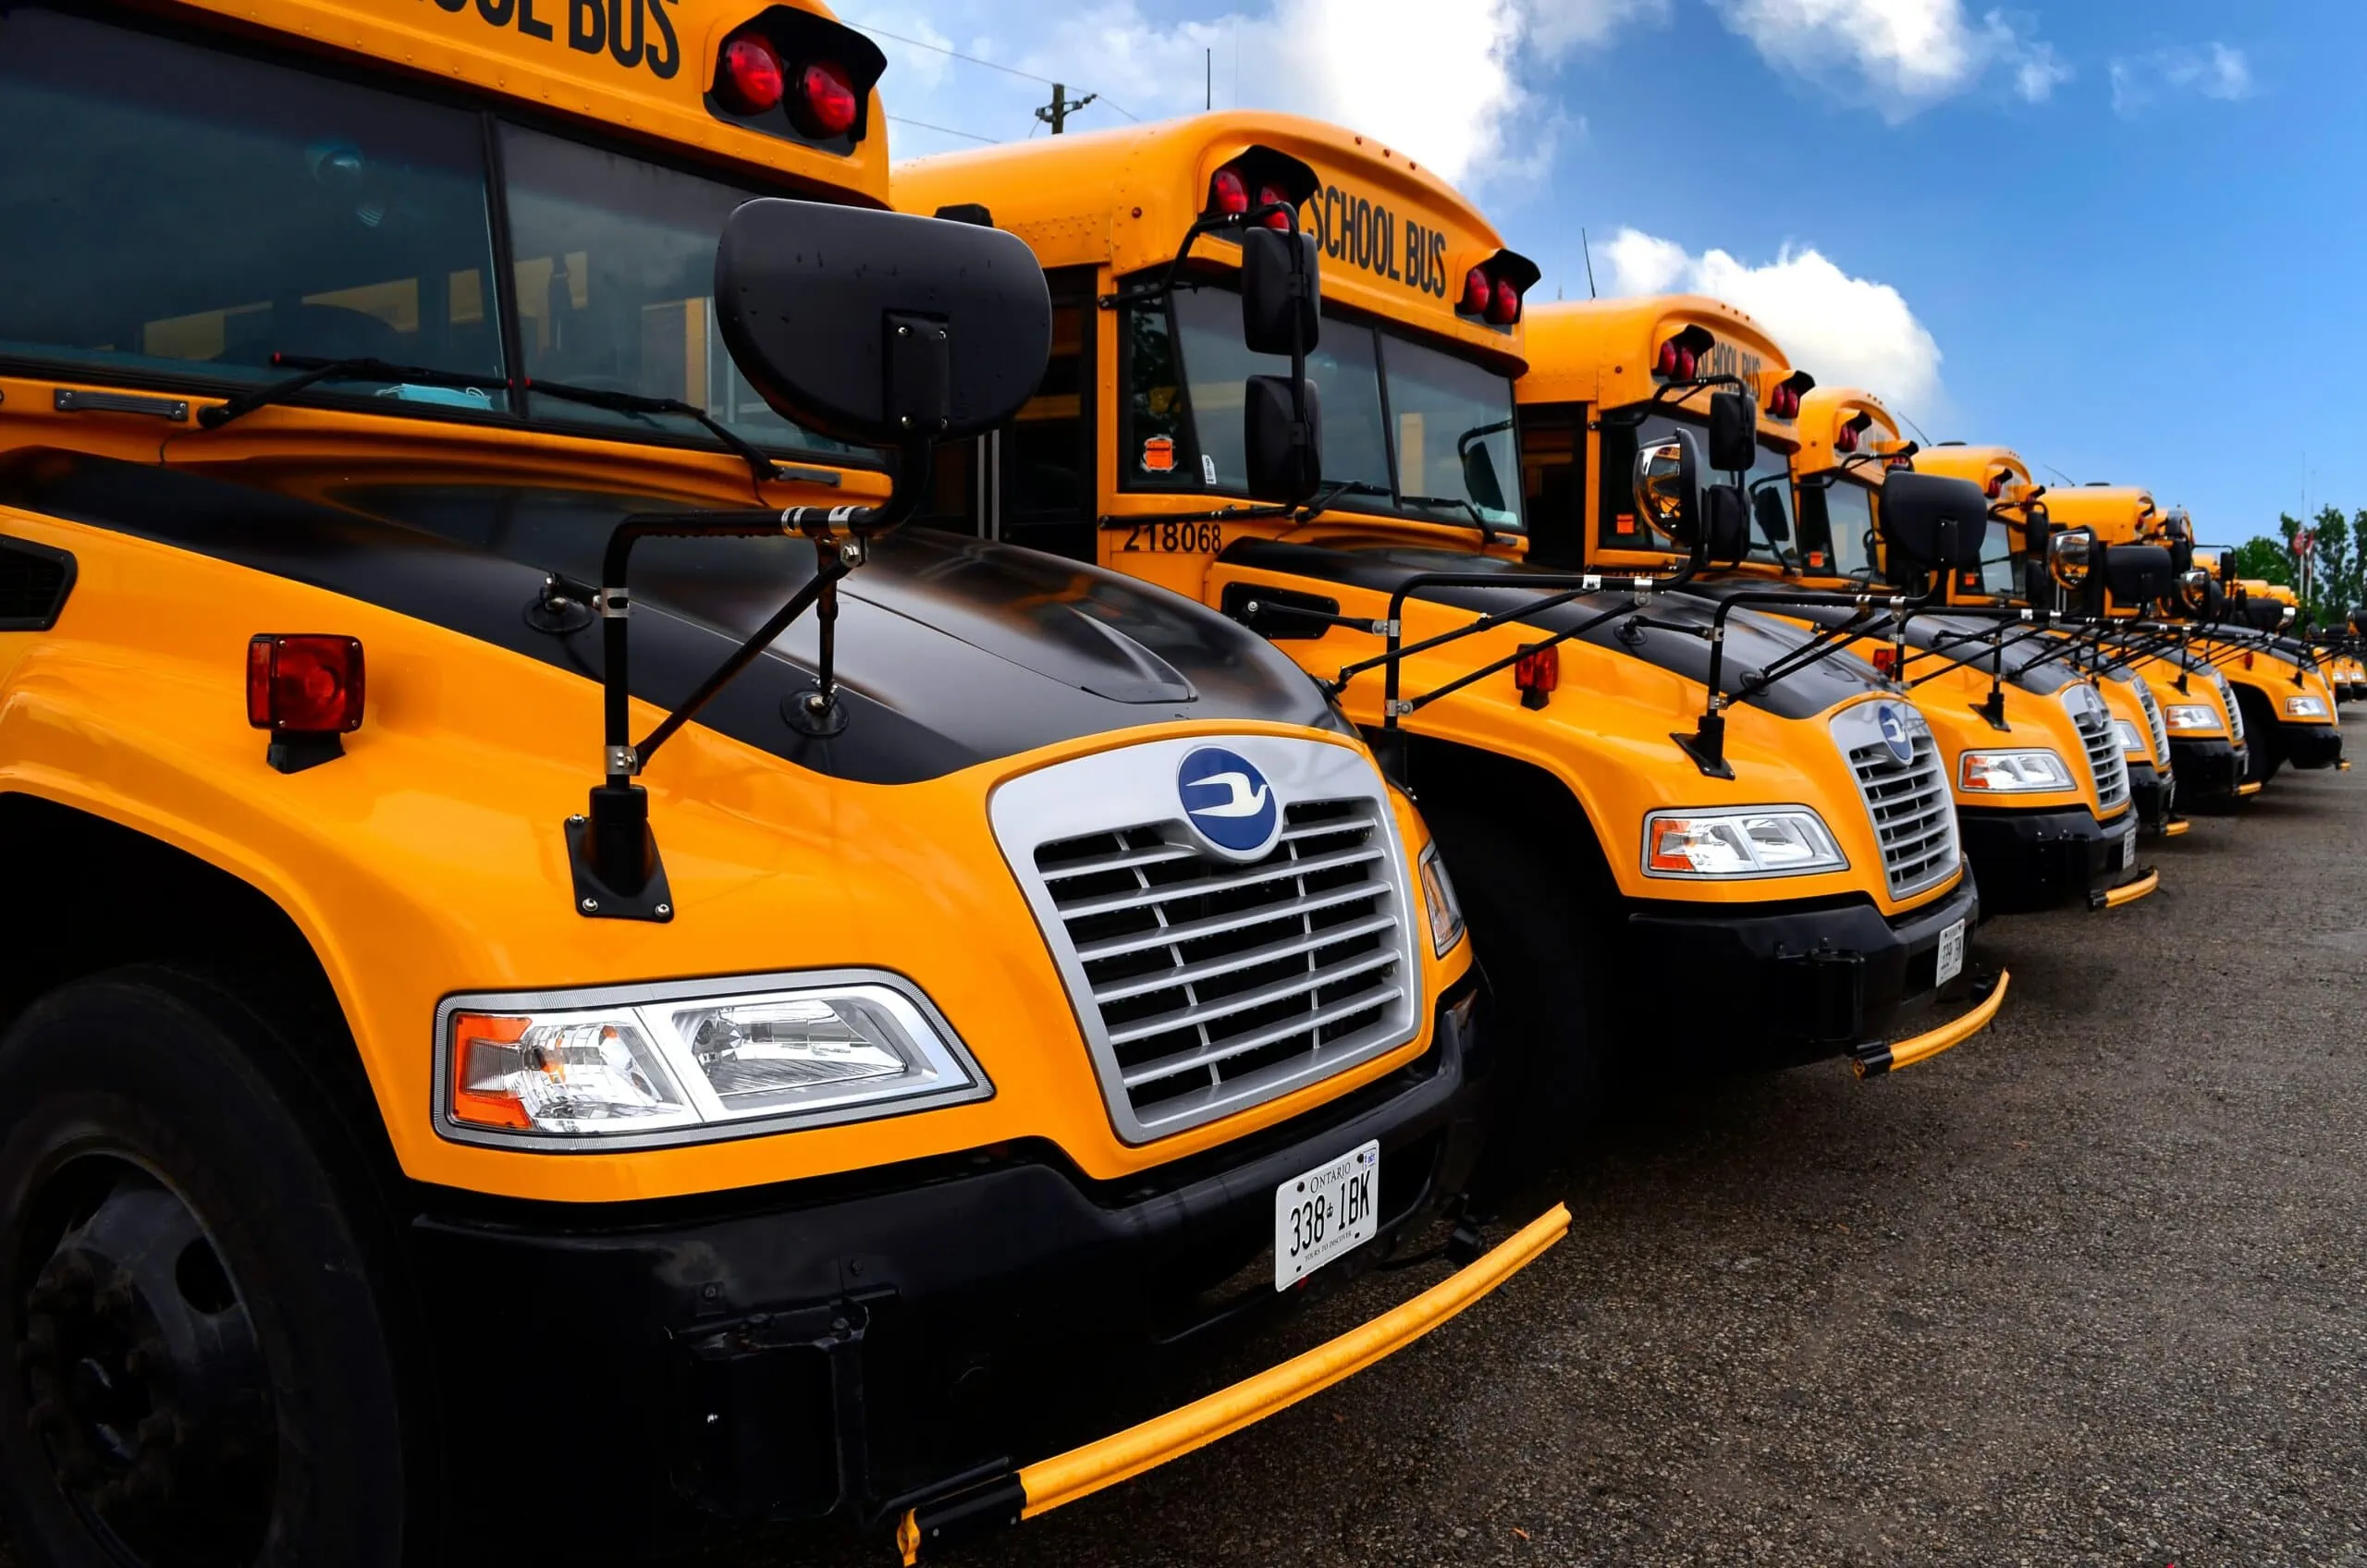 Row of school buses with GPS dash cams